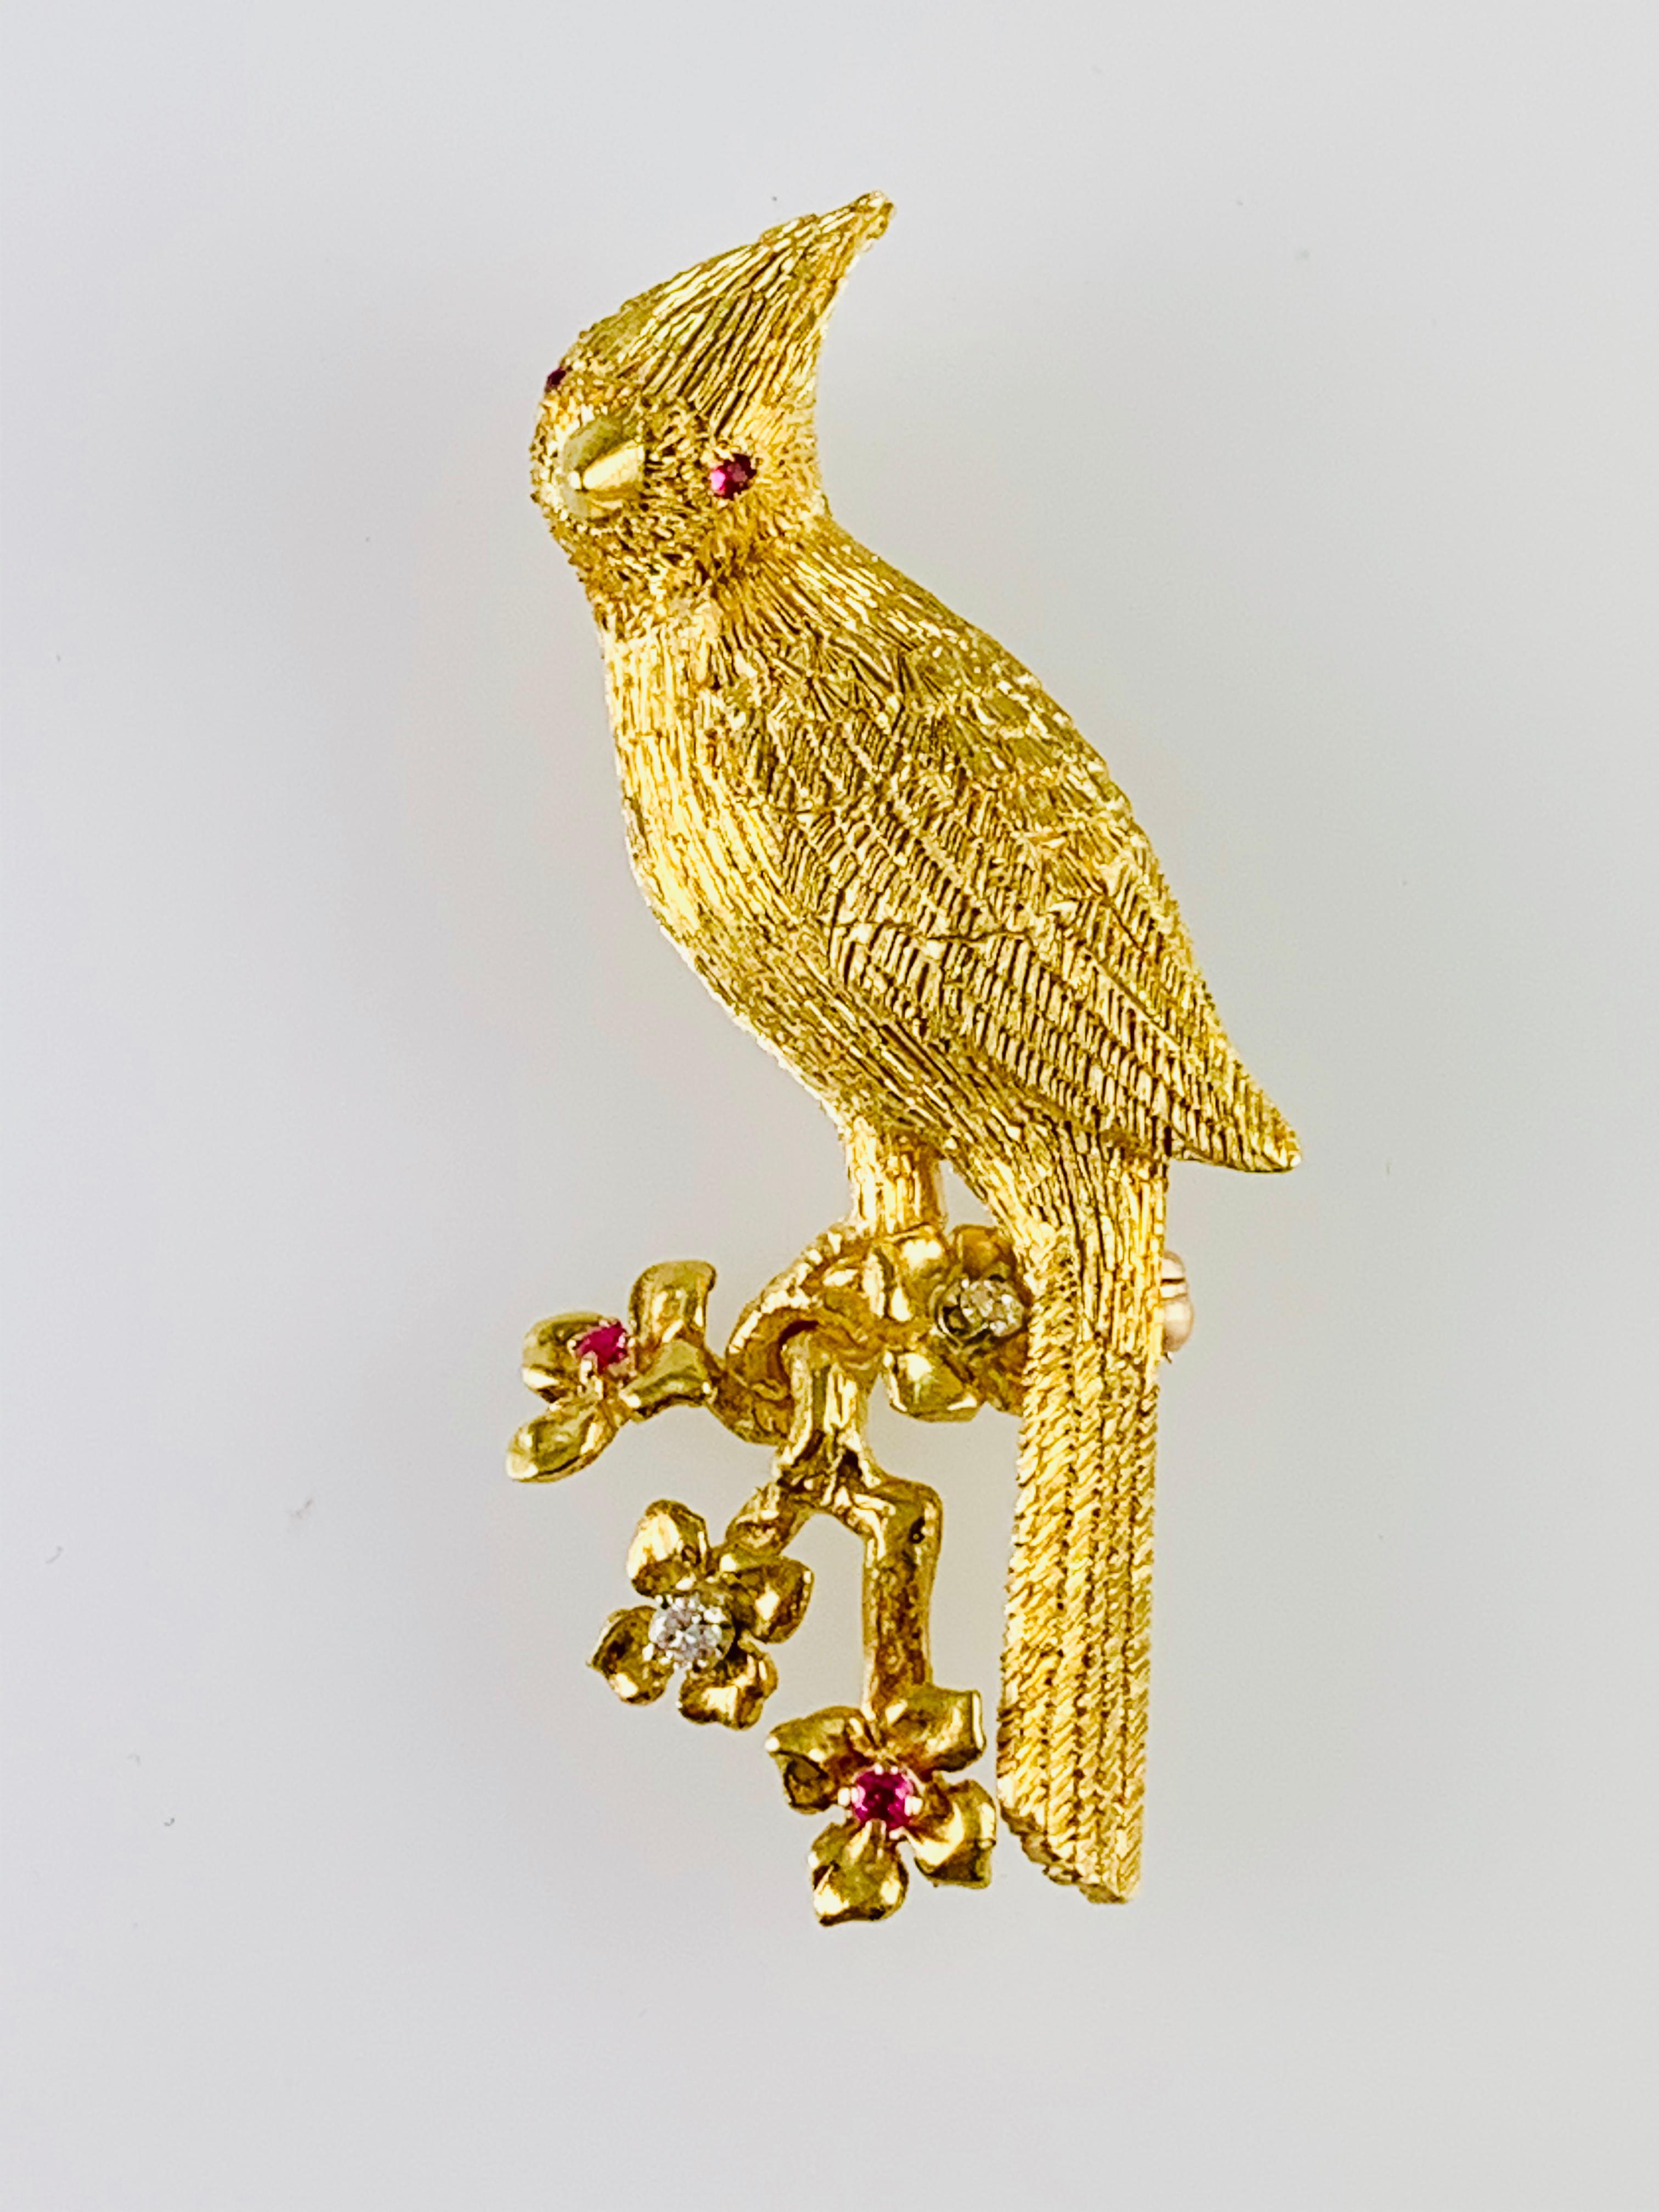 Gorgeous Bird Brooch! made in 18K yellow Gold. It has Bright Ruby Eyes and then two diamonds and two rubies in the flowers on the branch. The brooch  measures 2 inches by 1 inch and weighs 15.7 grams. The workmanship on this piece is simply